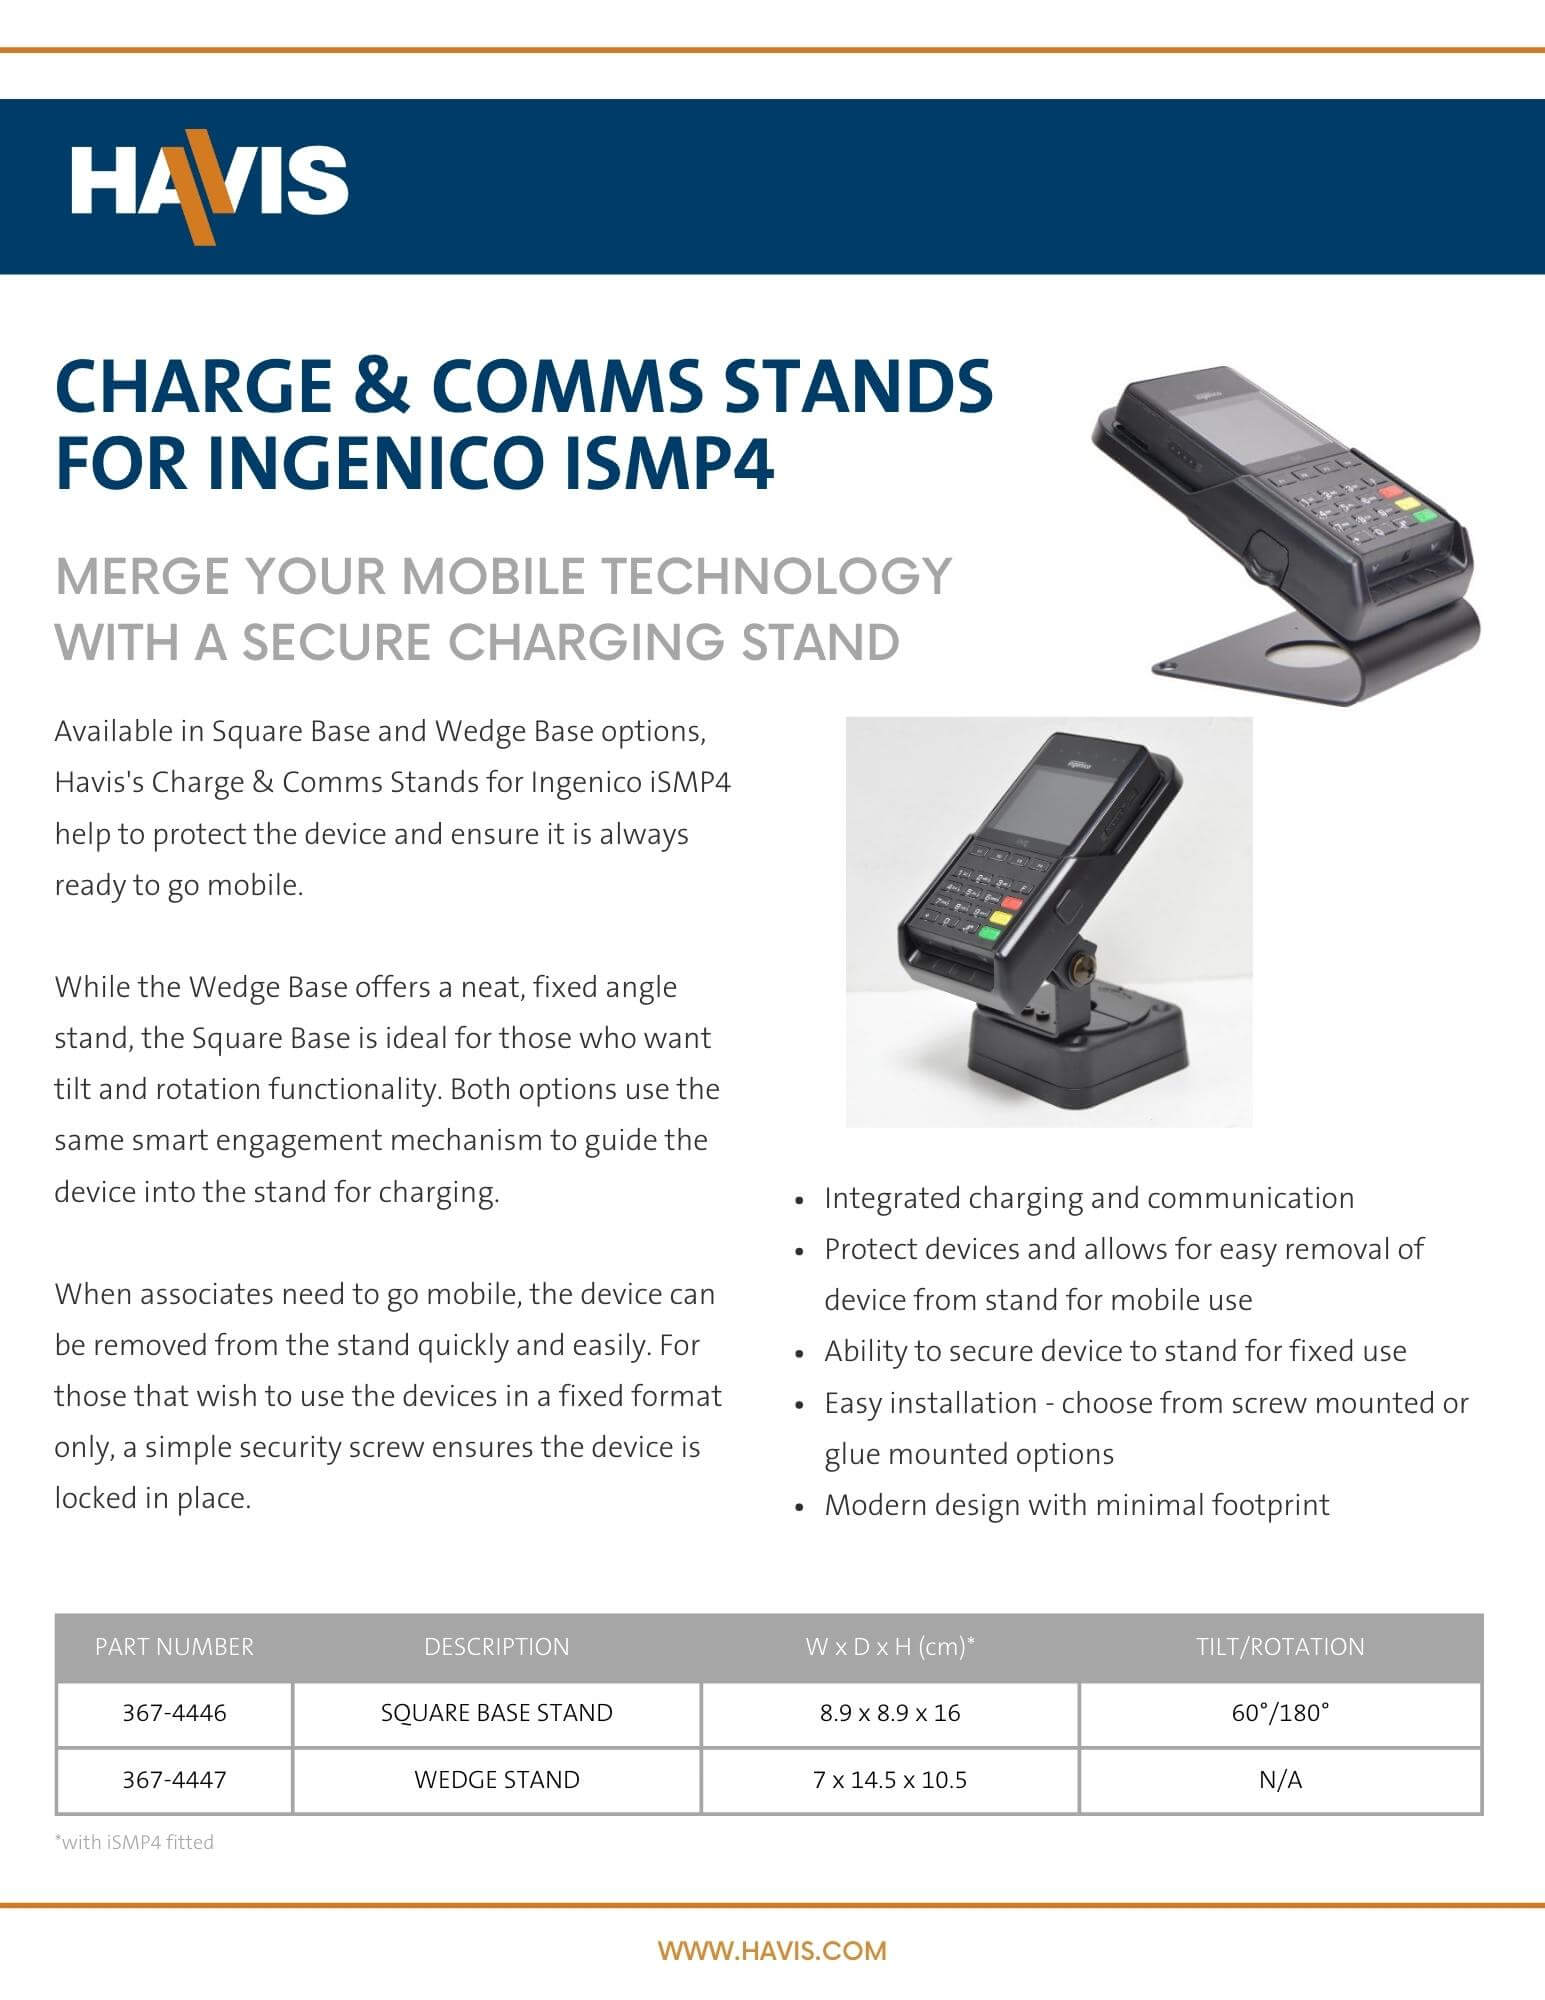 Charge & Comms Stand - Ingenico iSMP4 - Datasheet